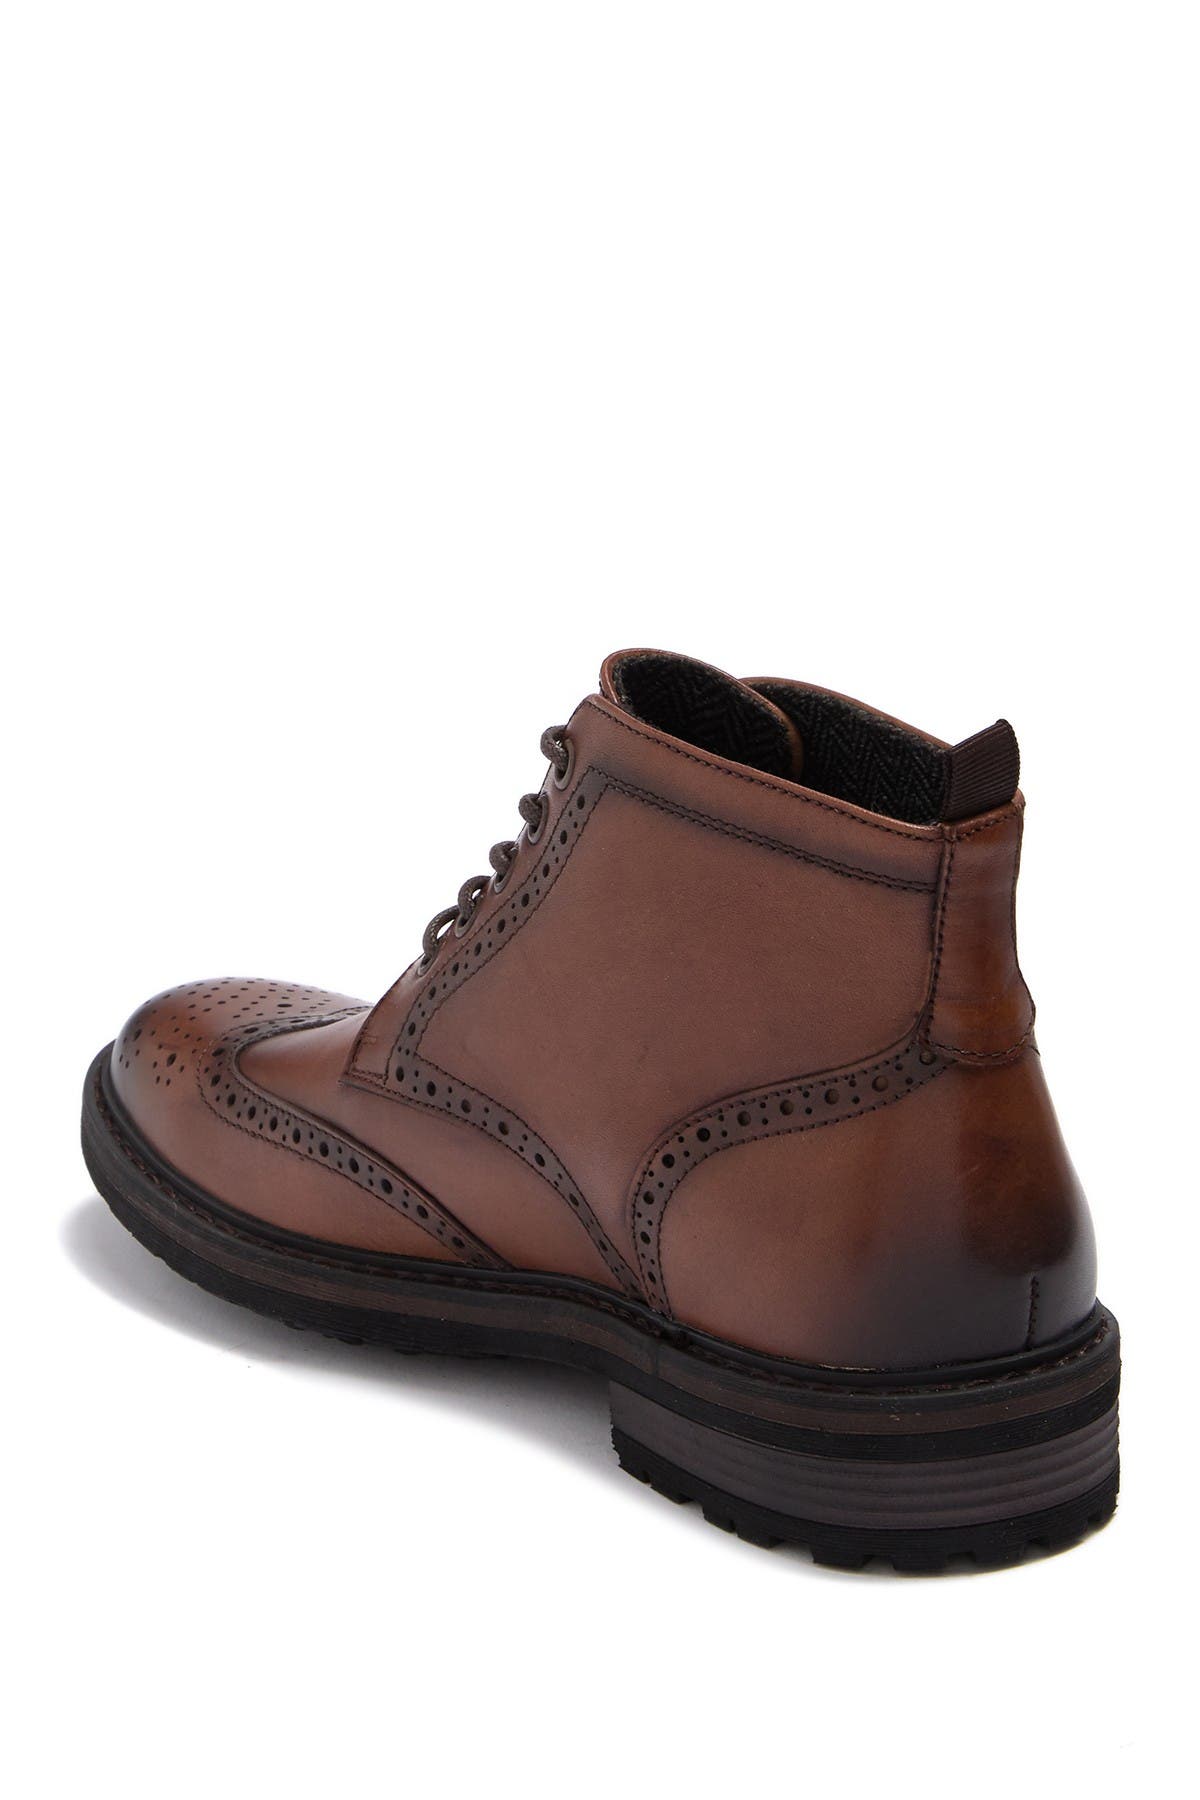 kenneth cole reaction design wingtip boot